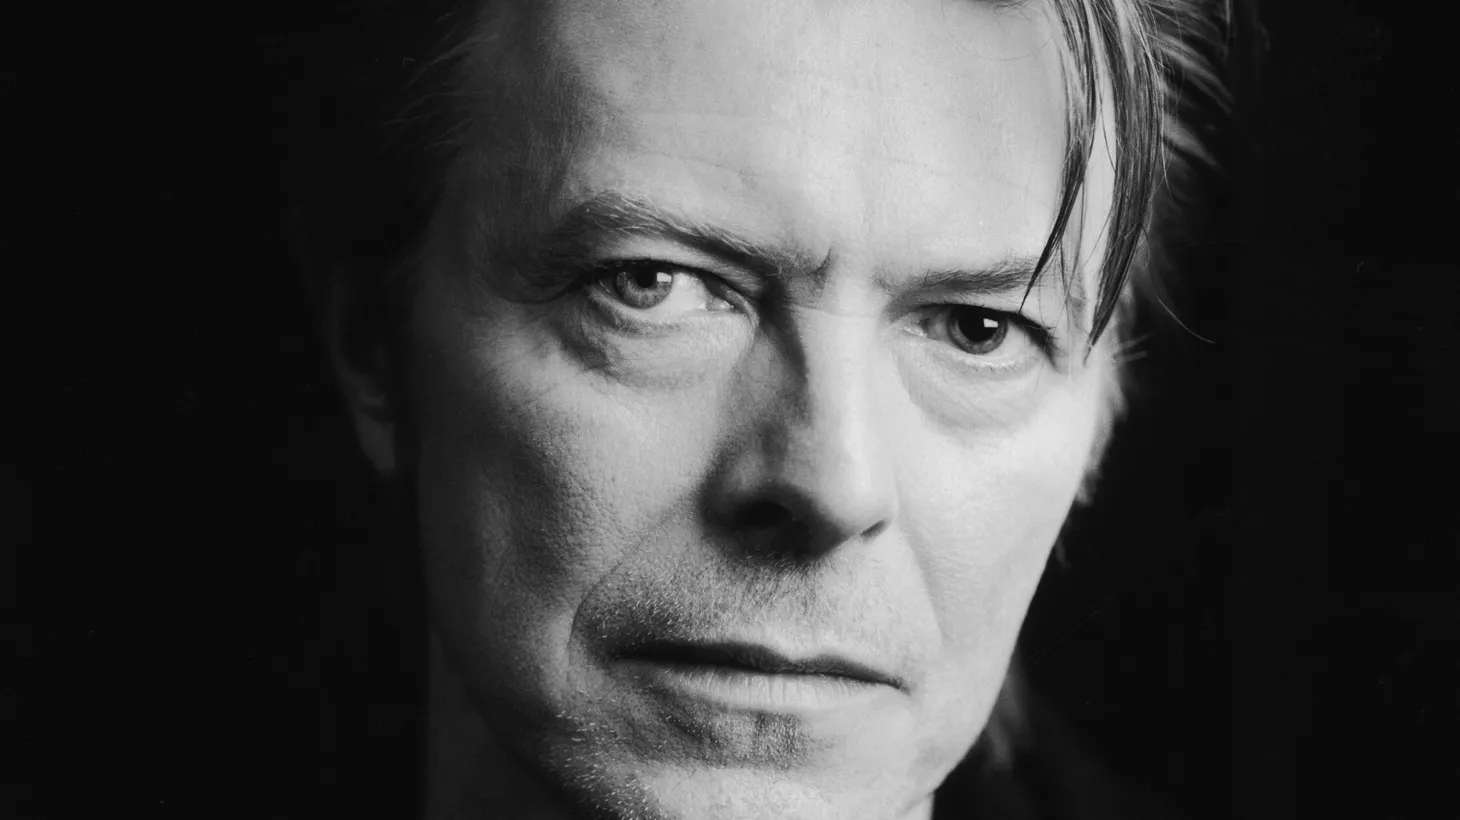 Living legend David Bowie joins us to discuss his album Earthling and much more.